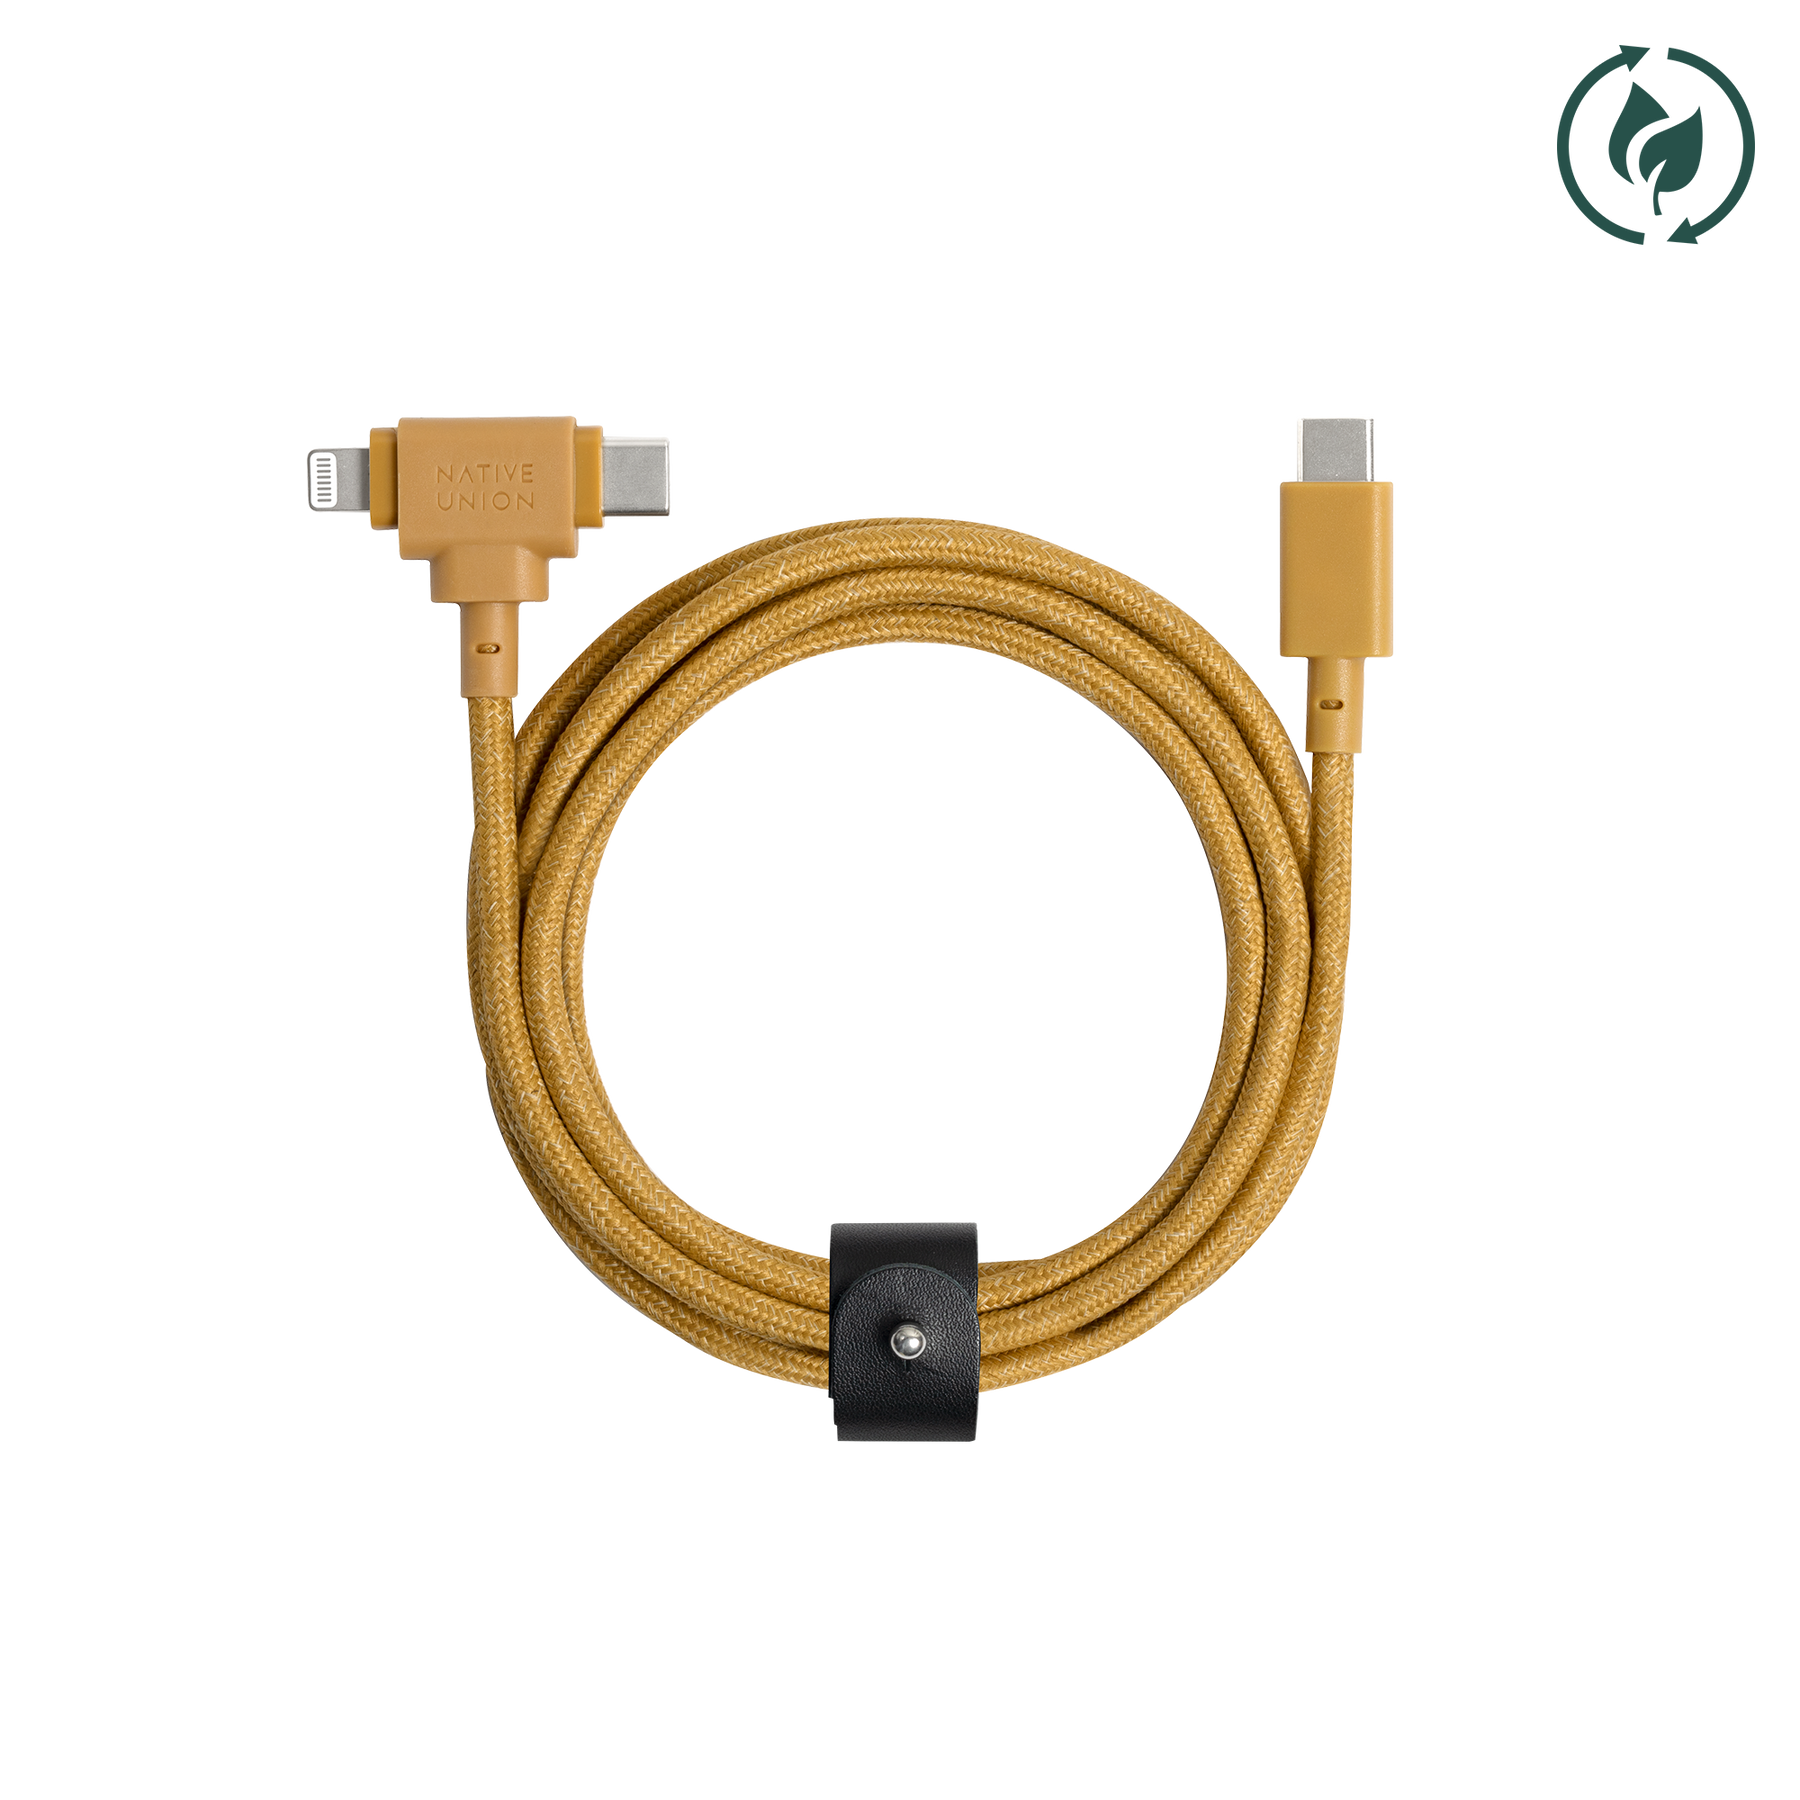 Simply Tech USB Type-C Charge + Sync Data Cable For Galaxy & Android  Devices